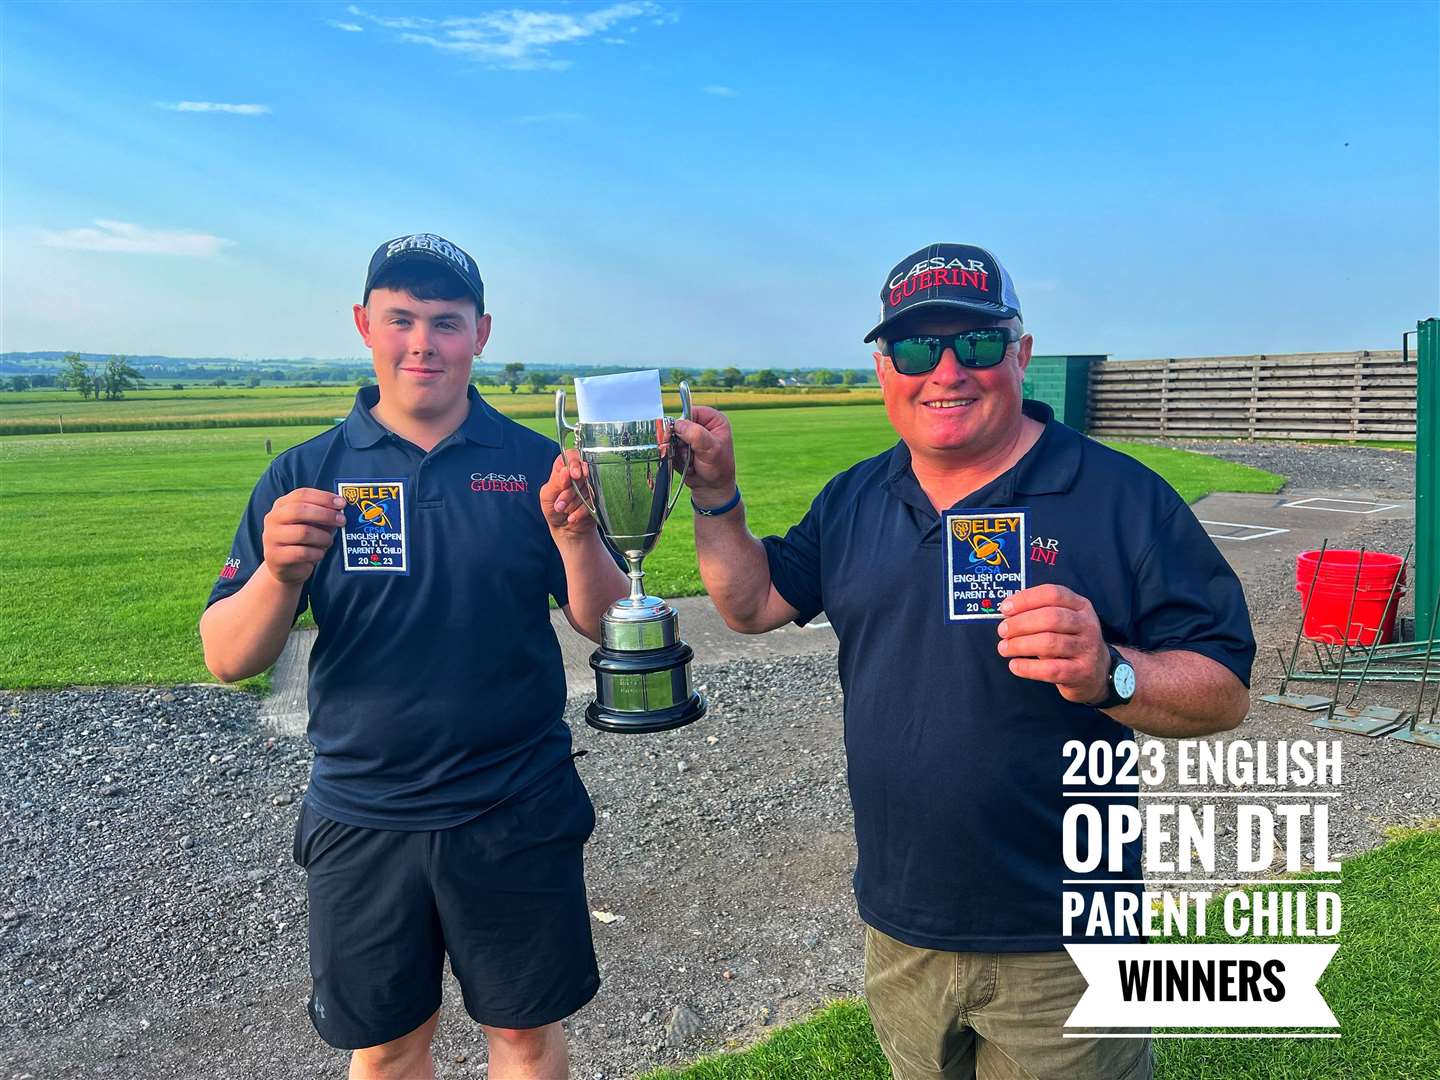 Marcus and Hamish Munro were thrilled to win the prestigious parent and child competition at the English Open DTL shooting tournament.